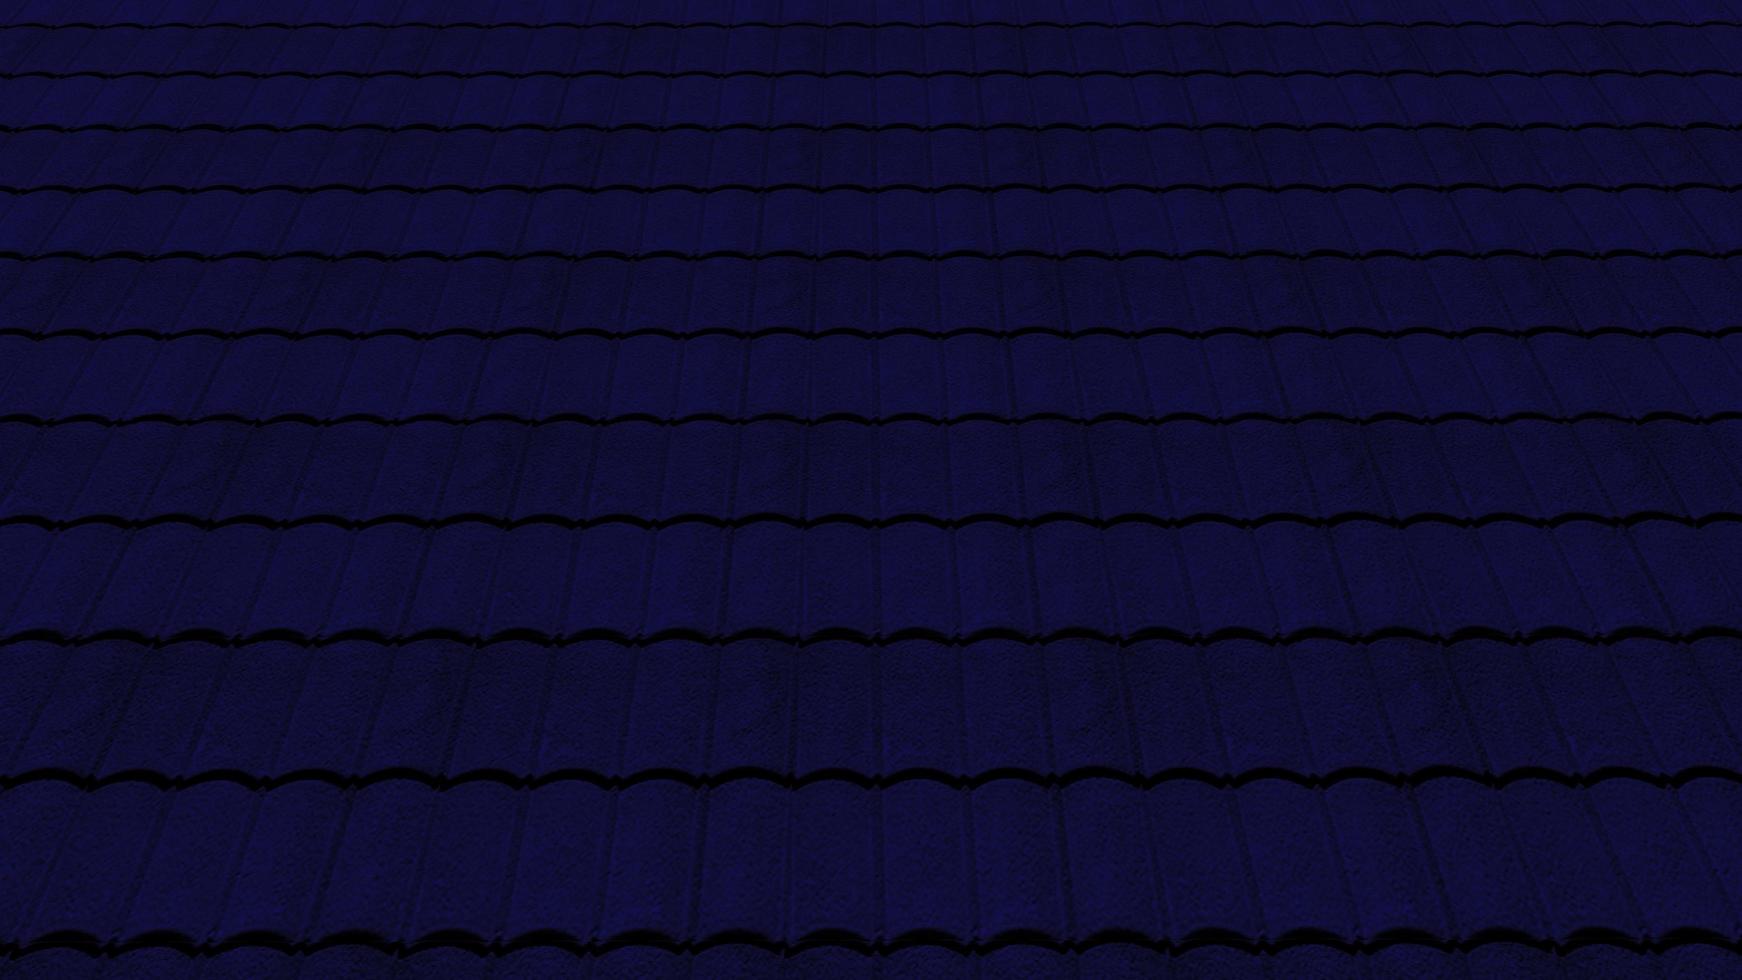 Metal roof texture for background or cover photo